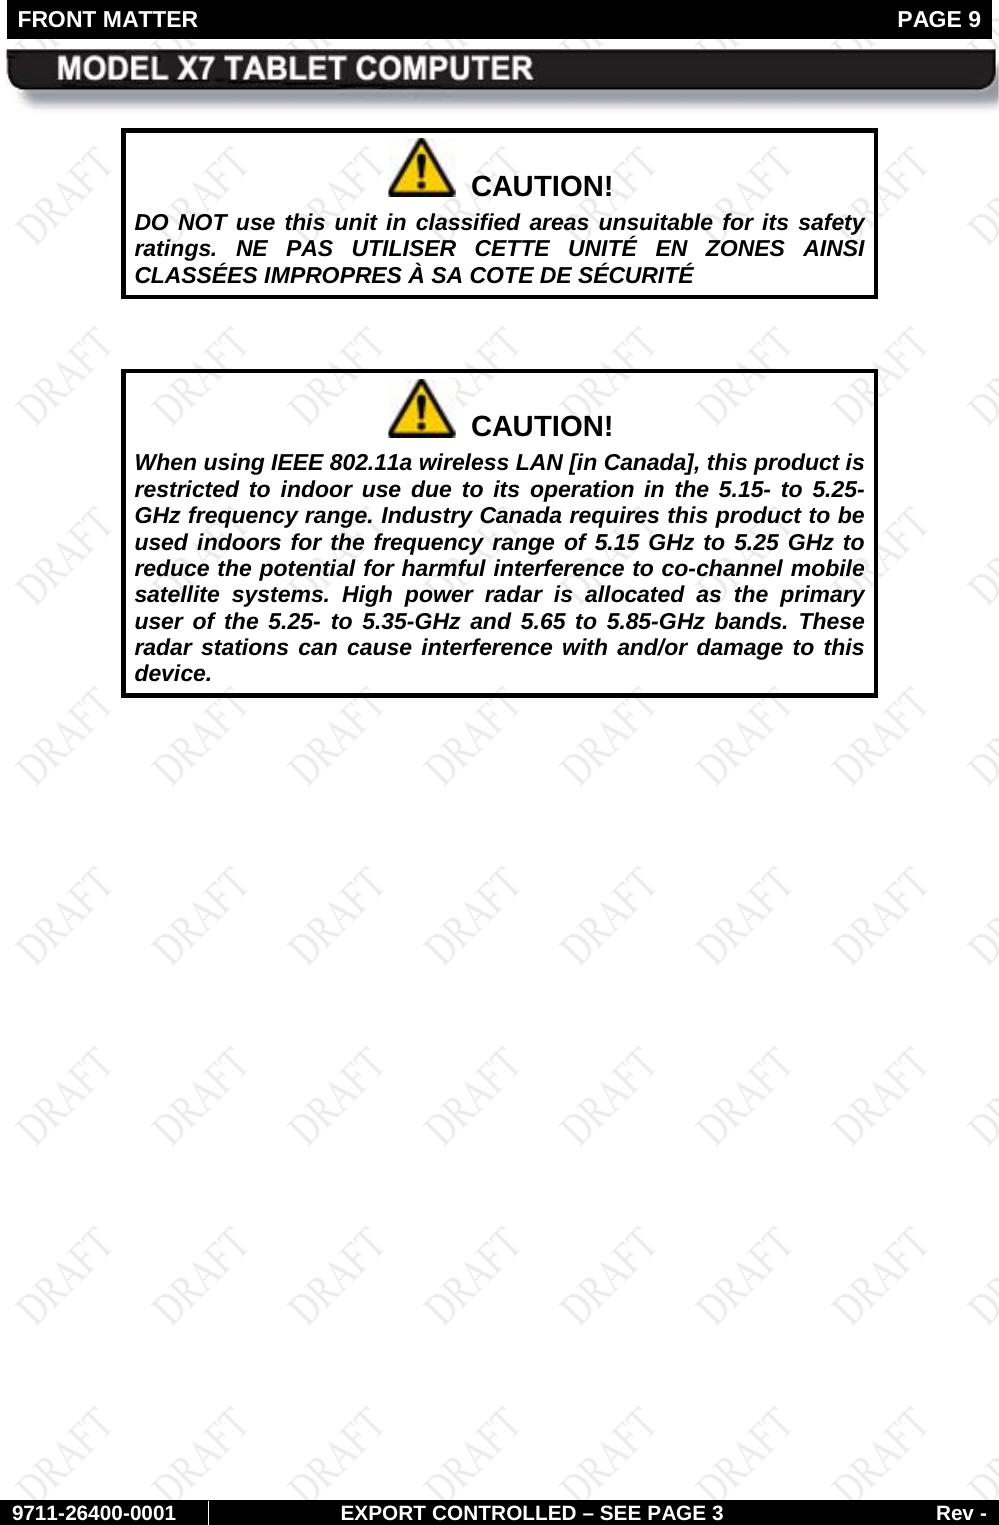 FRONT MATTER   PAGE 9        9711-26400-0001 EXPORT CONTROLLED – SEE PAGE 3 Rev -   CAUTION! DO NOT use this unit in classified areas unsuitable for its safety ratings. NE PAS UTILISER CETTE UNITÉ EN ZONES AINSI CLASSÉES IMPROPRES À SA COTE DE SÉCURITÉ    CAUTION! When using IEEE 802.11a wireless LAN [in Canada], this product is restricted to indoor use due to its operation in the 5.15- to 5.25-GHz frequency range. Industry Canada requires this product to be used indoors for the frequency range of 5.15 GHz to 5.25 GHz to reduce the potential for harmful interference to co-channel mobile satellite systems. High power radar is allocated as the primary user of the 5.25- to 5.35-GHz and 5.65 to 5.85-GHz bands. These radar stations can cause interference with and/or damage to this device.     